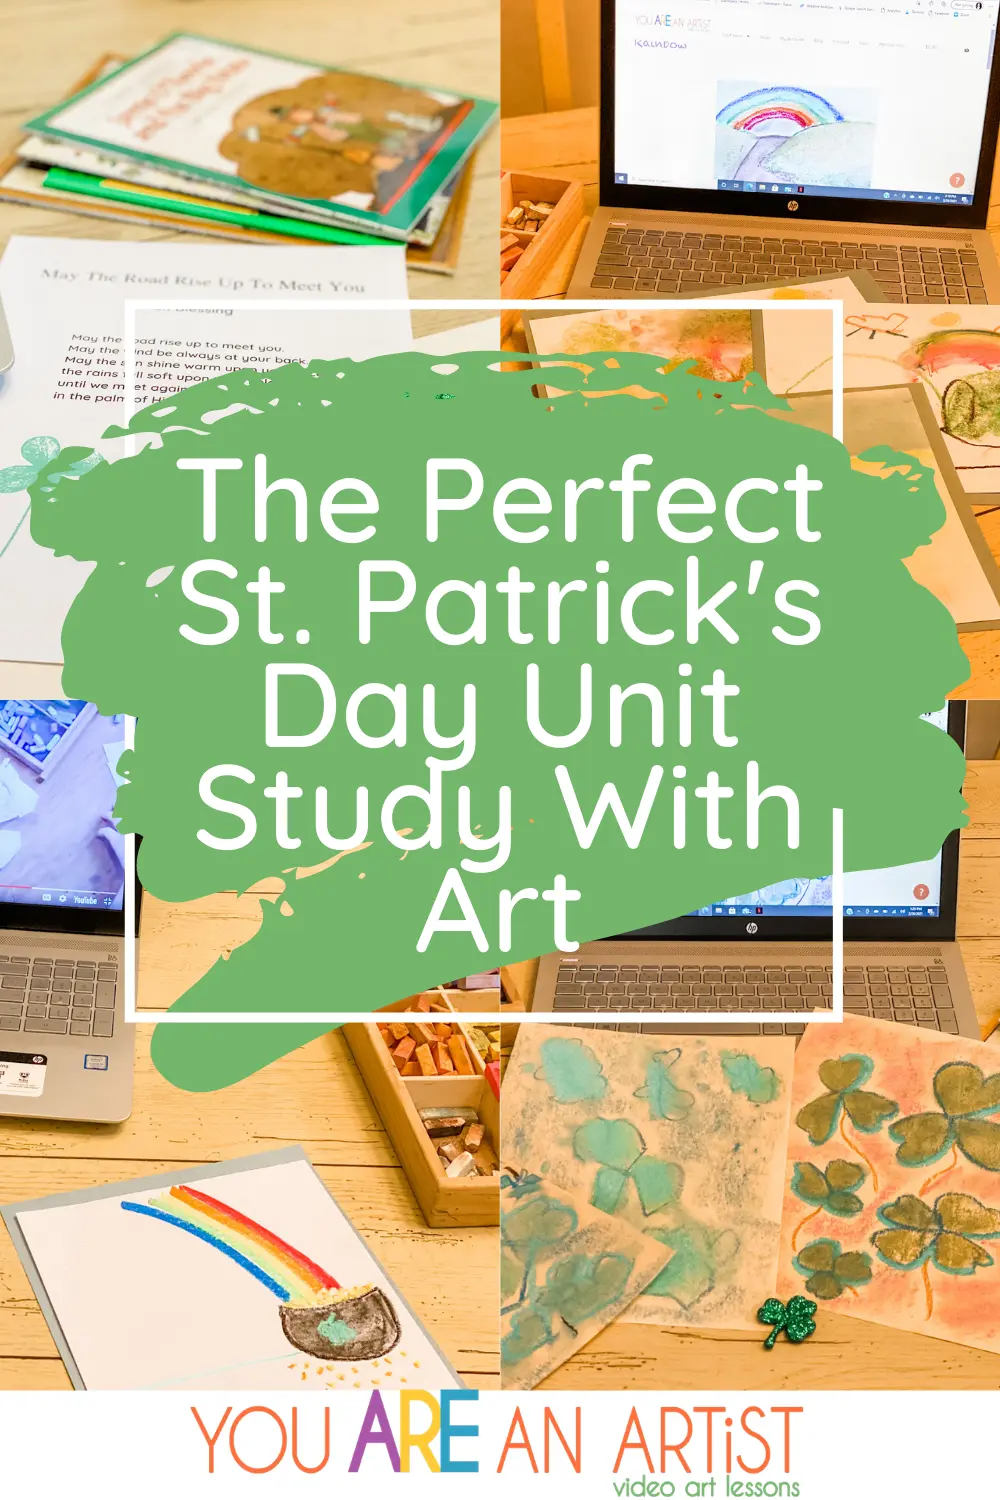 We have the perfect way to celebrate St. Patrick's Day in your homeschool! Art, unit study ideas, and more! #homeschool #stpatricks #stpatricksday #stpatricksdayforkids #homeschoolart